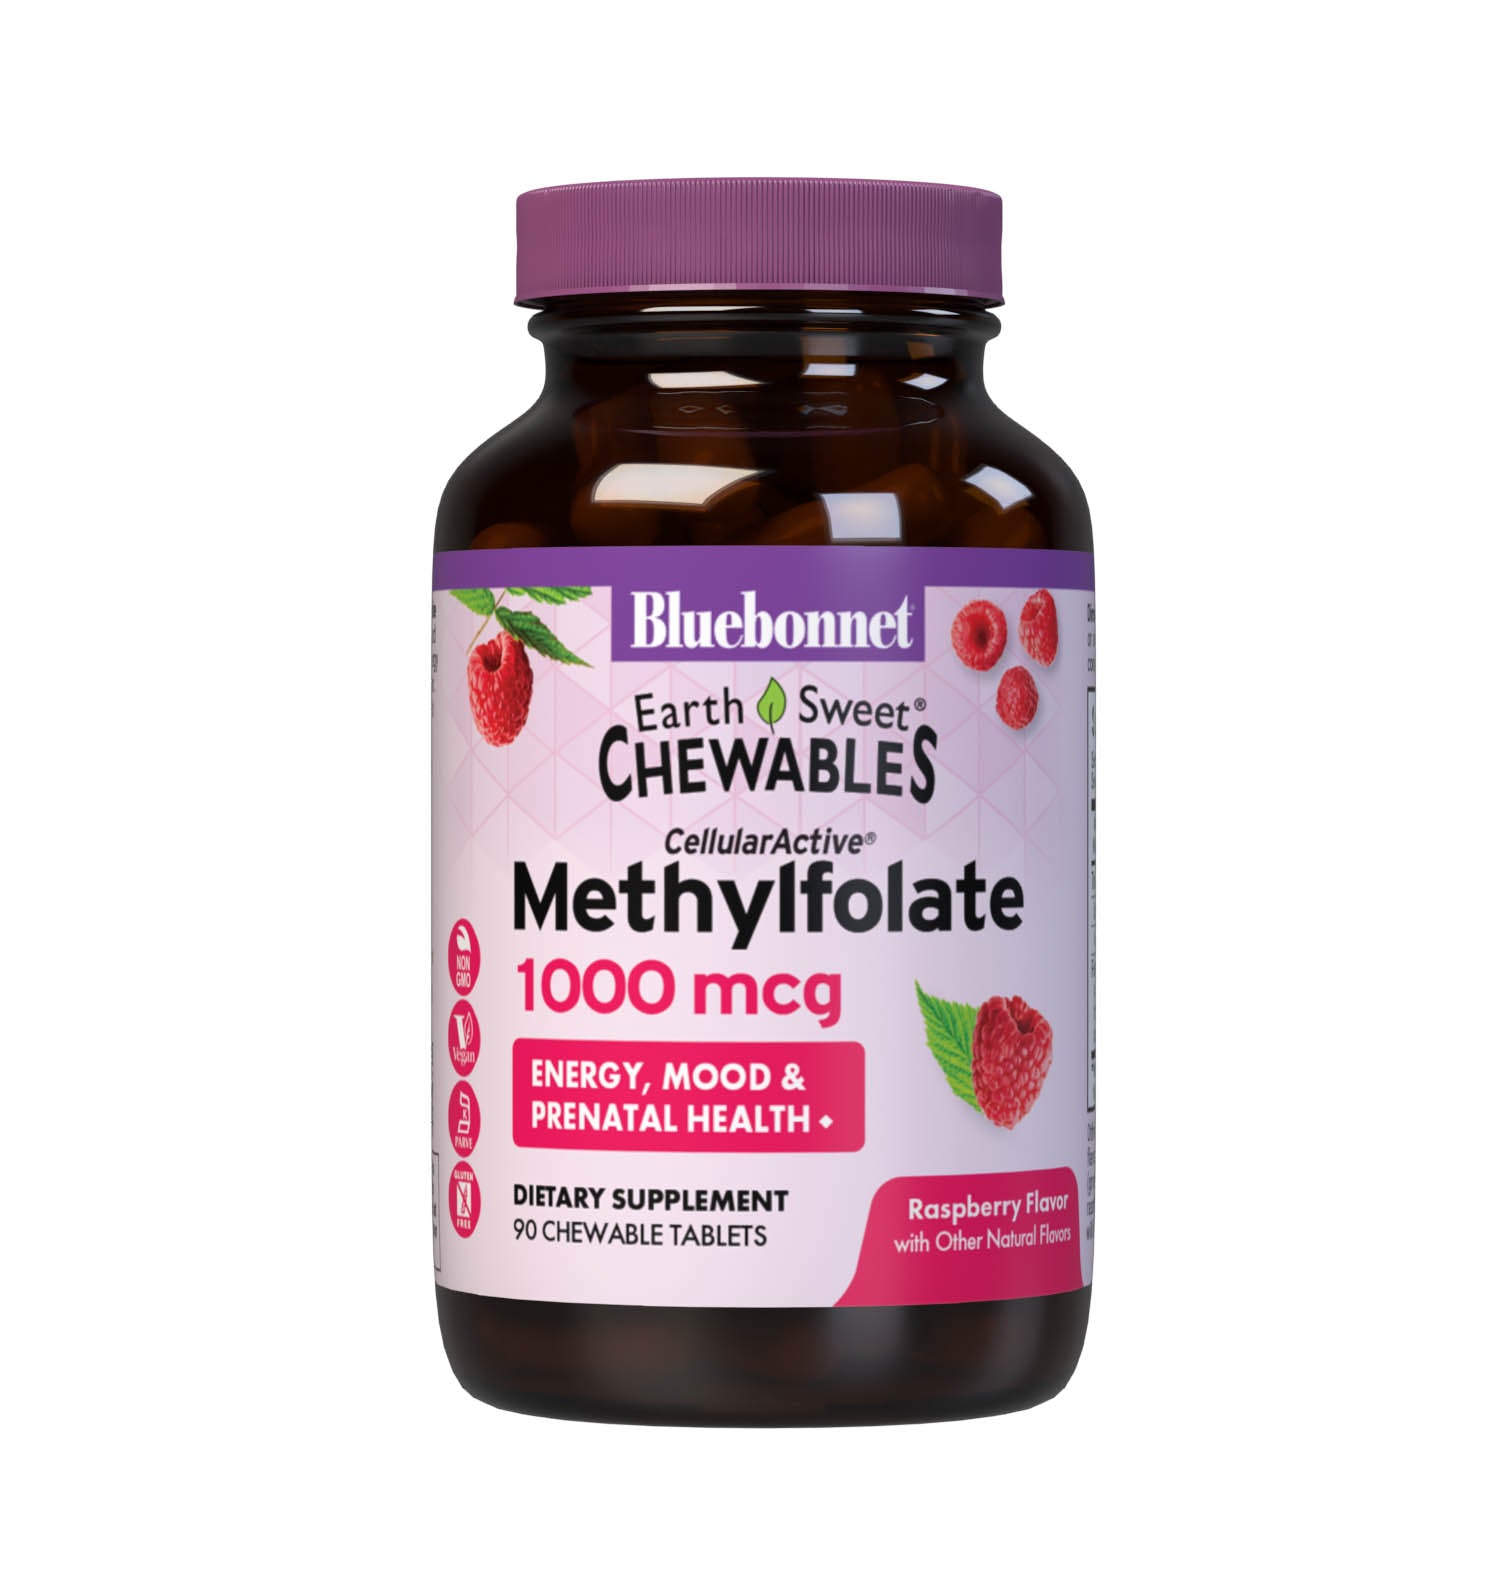 Bluebonnet’s EarthSweet Chewables CellularActive Methylfolate 1000 mcg Tablets are formulated with QuatreFolic a fourth generation folate that supports healthy neurological development, and that has superior stability, solubility, safety and bioactivity when compared to other forms. This product sweetened with EarthSweet a proprietary sweetening mix of fruit powders and sugar cane crystals.  #size_90 count